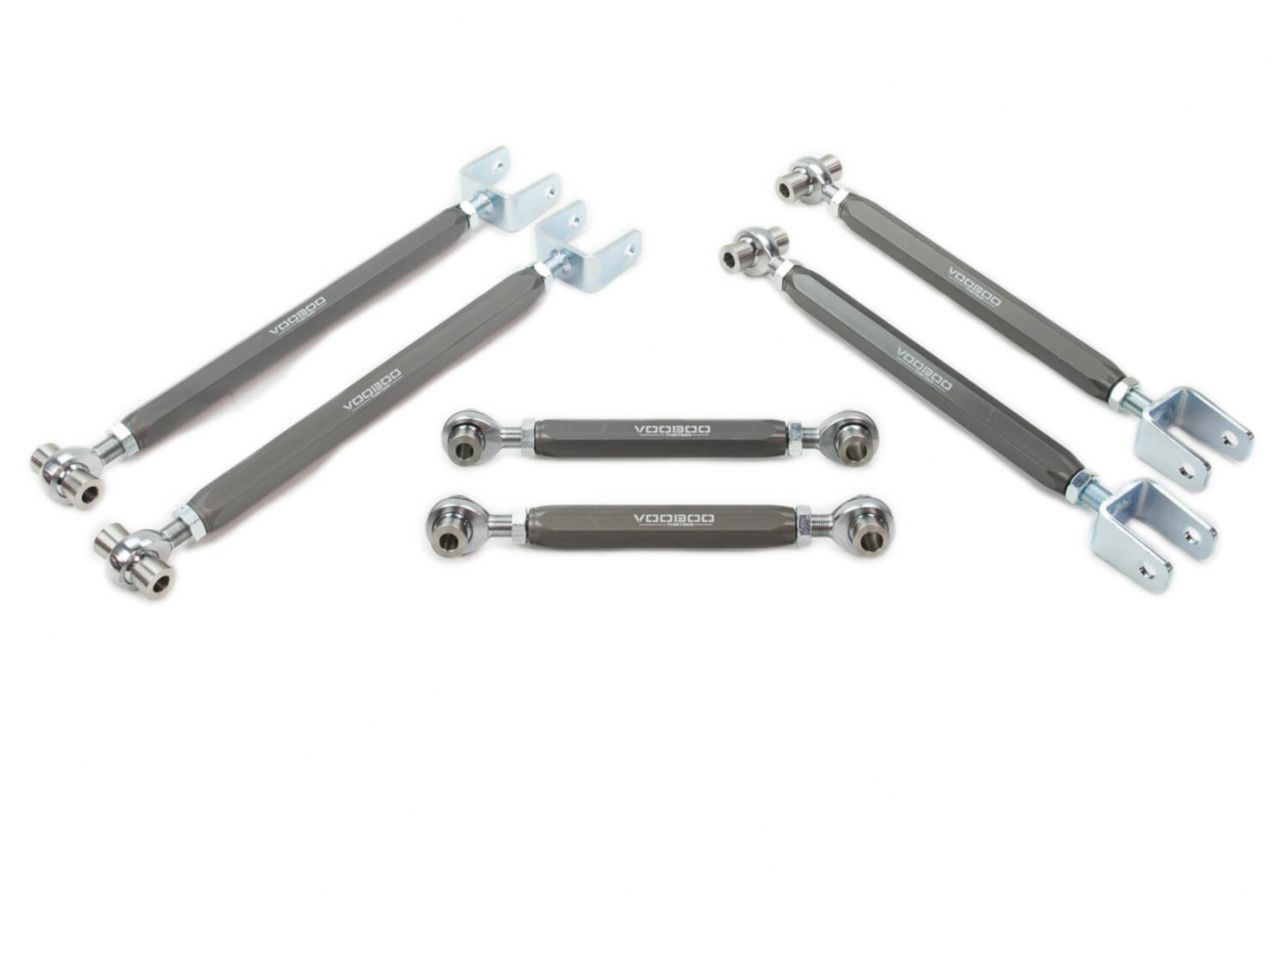 Voodoo13 Trailing Arm - Hard Anodize Clear (Gray)